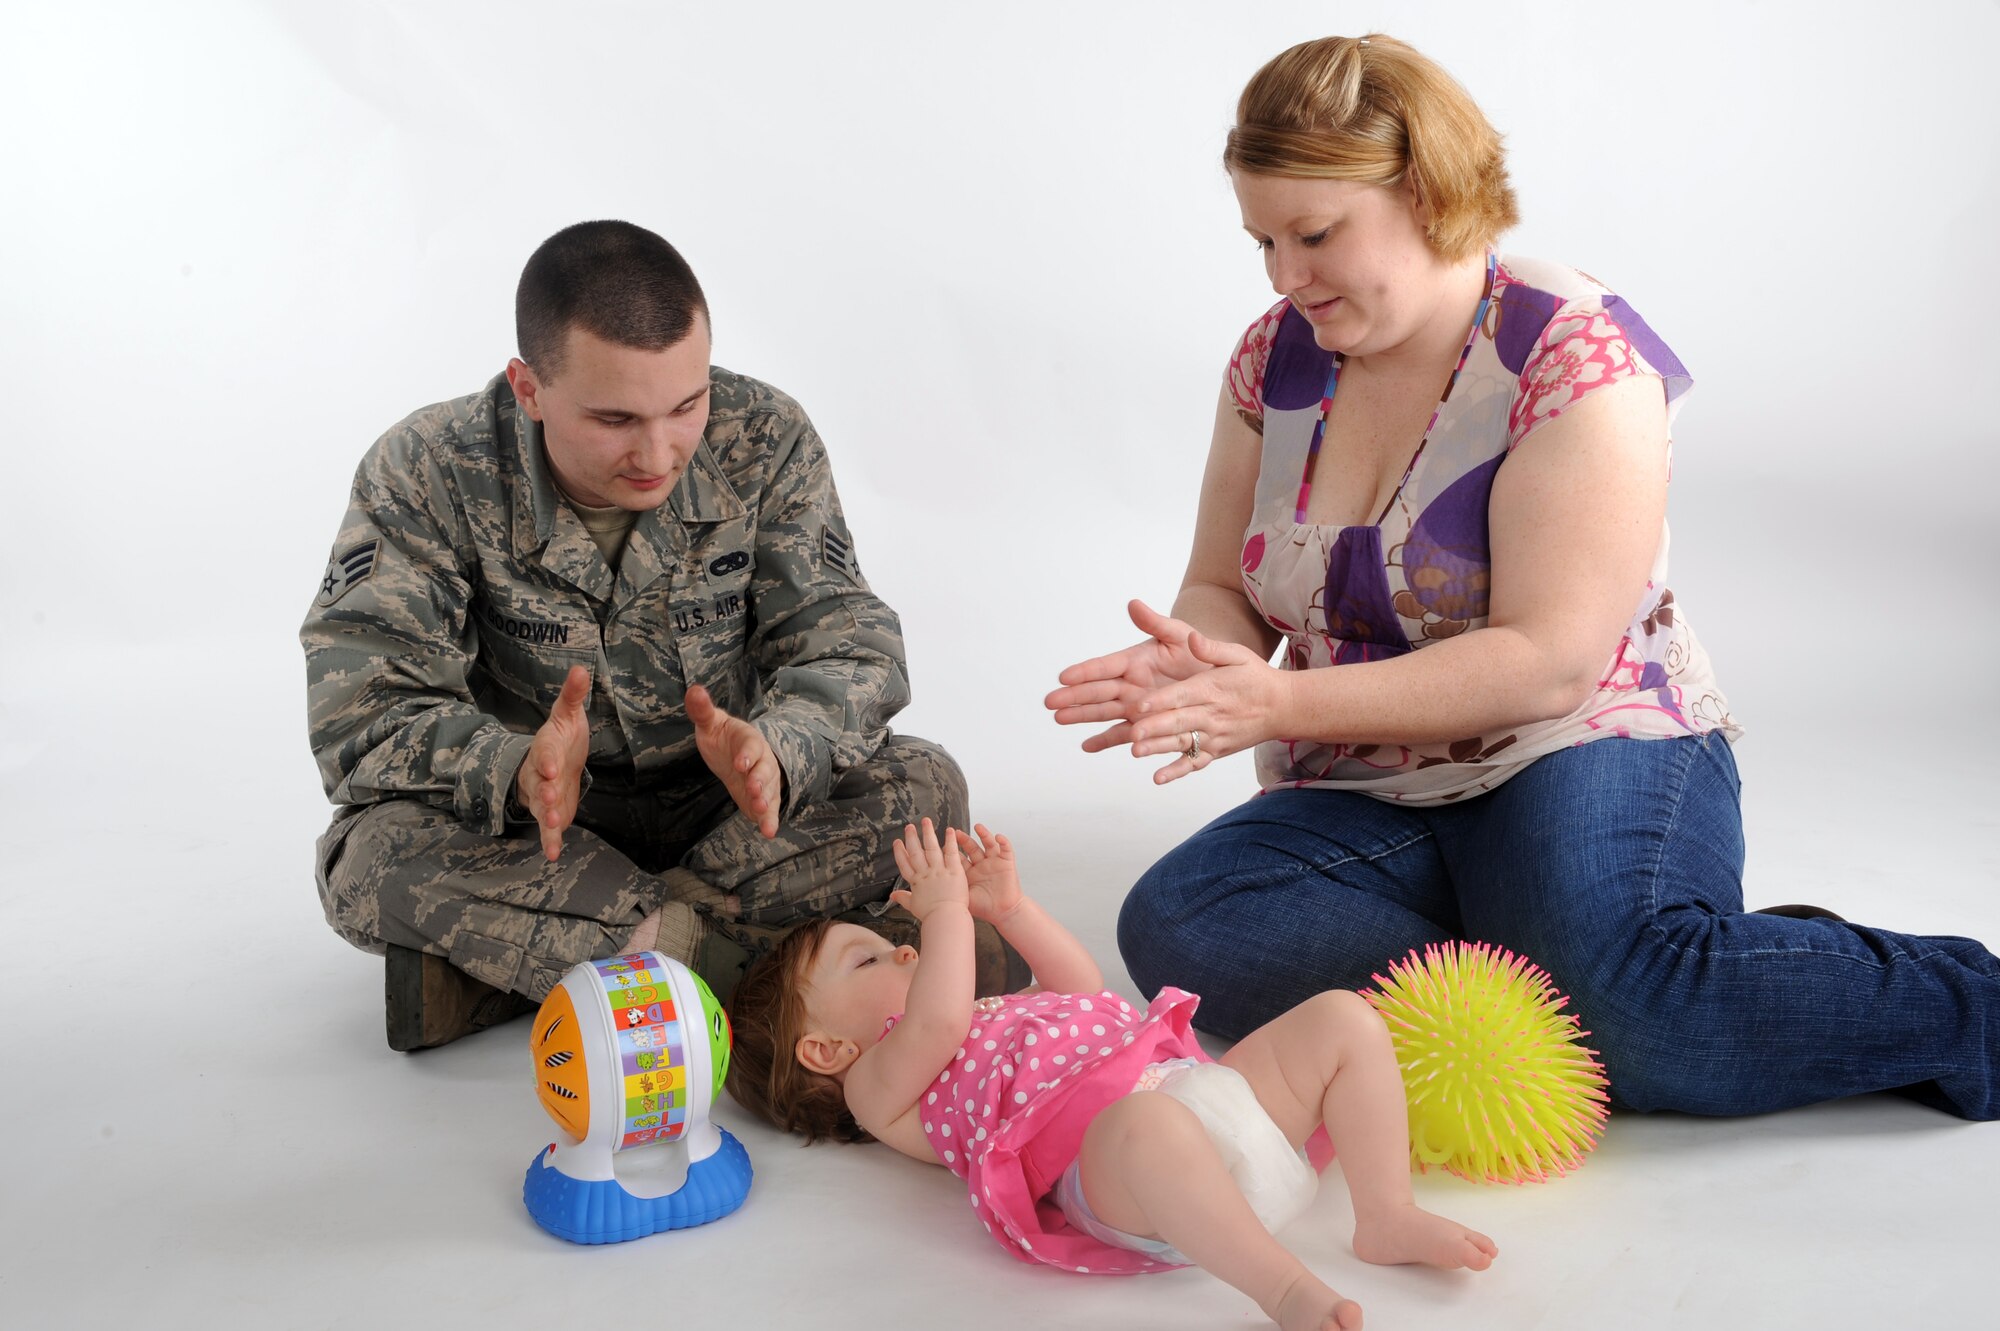 Senior Airman Derek Goodwin, 2d Maintenance Squadron, and his wife Stormy play with their daughter Skyler. Skyler was diagnosed with Septo-optic Dysplasia when she was three-months-old. The cause of SOD is unknown, but genetics do not play a factor in the disorder. (U.S. Air Force photo by Senior Airman Joanna M. Kresge)